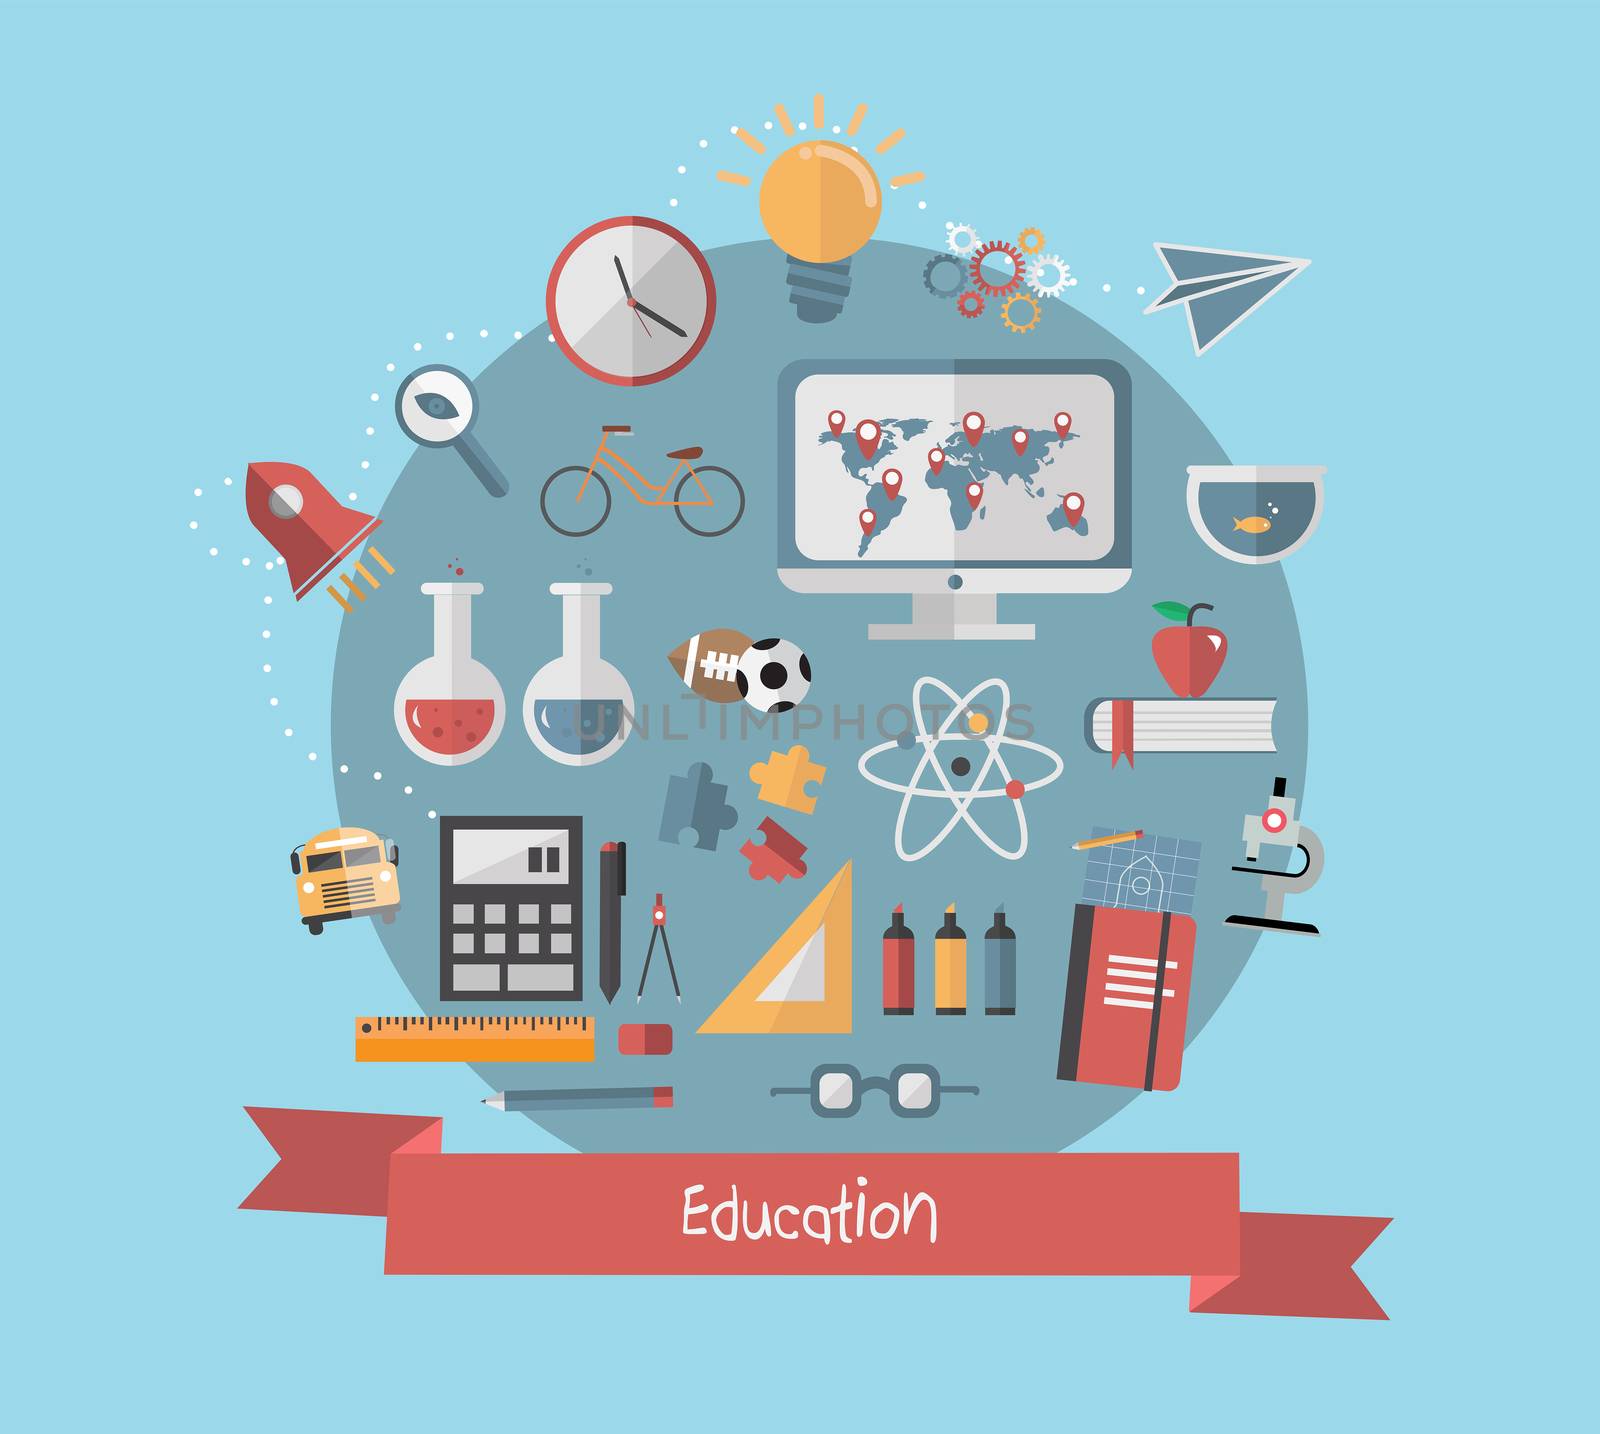 Education banner with school icons by Wavebreakmedia